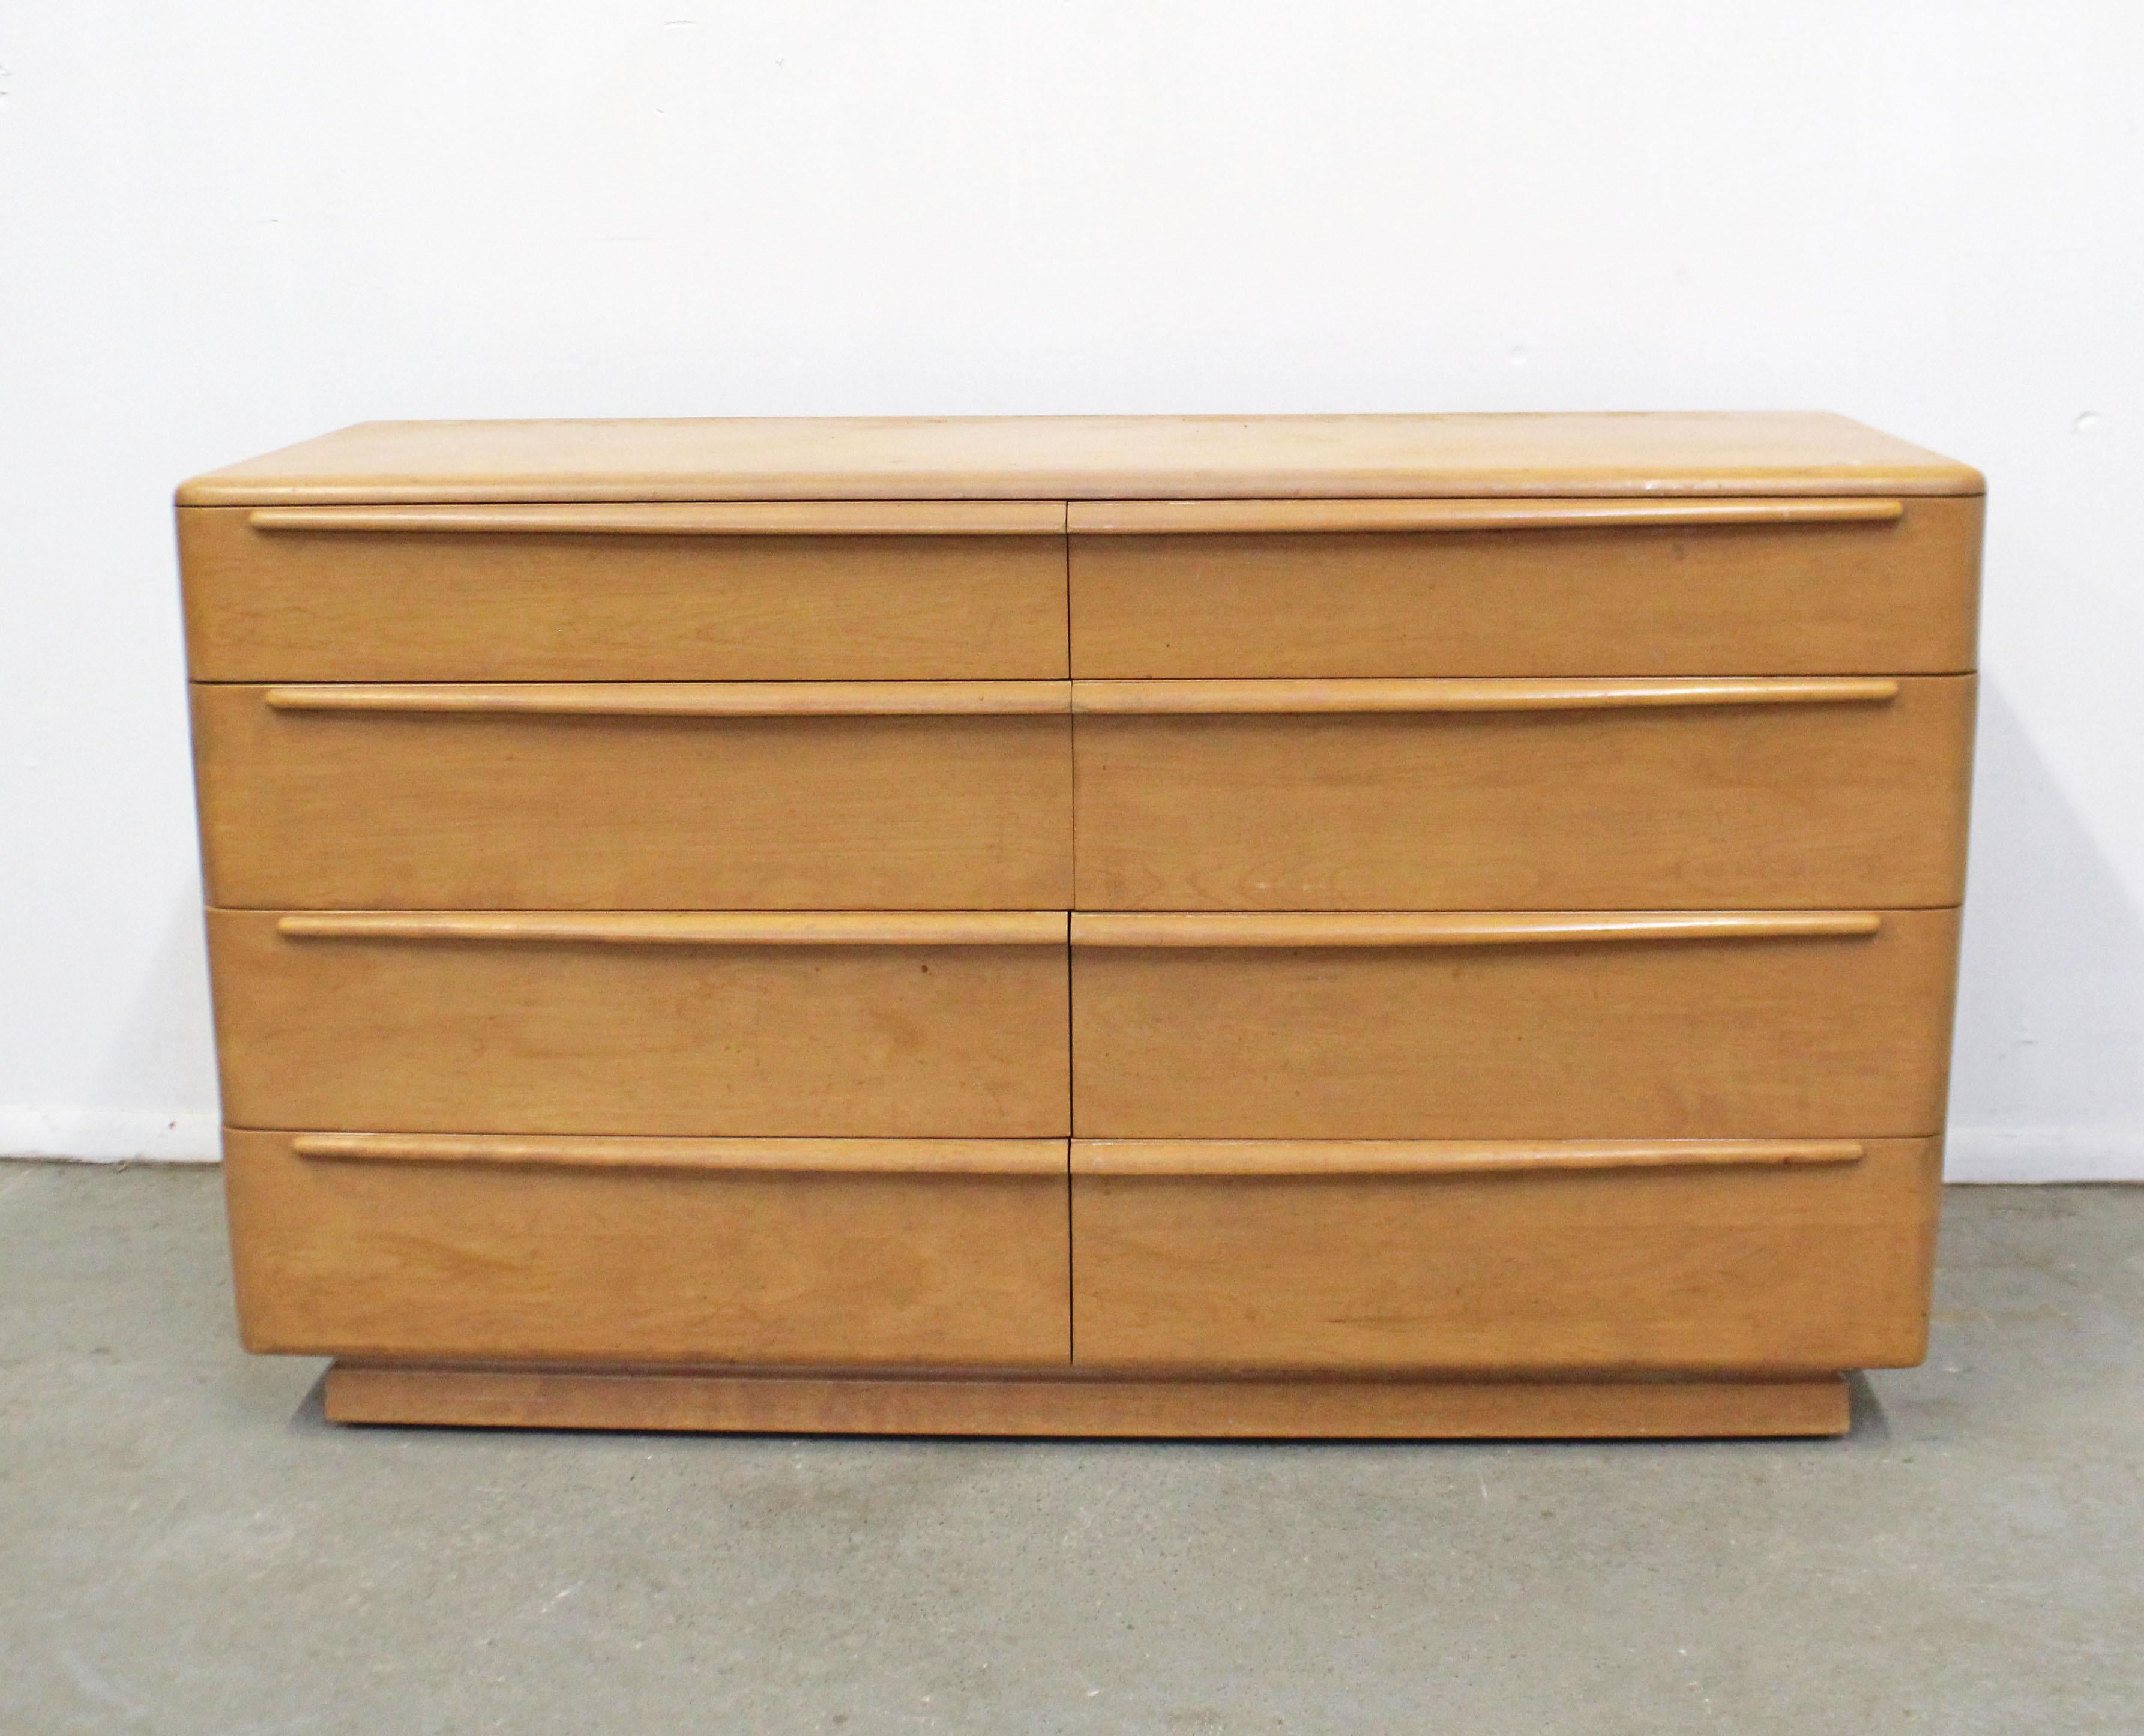 What a find. Offered is a vintage Mid-Century Modern dresser by Heywood Wakefield 'Encore,' circa 1957. This piece is built to last, made from yellow birch with eight drawers. Can be used as a sideboard or dresser. In decent condition considering